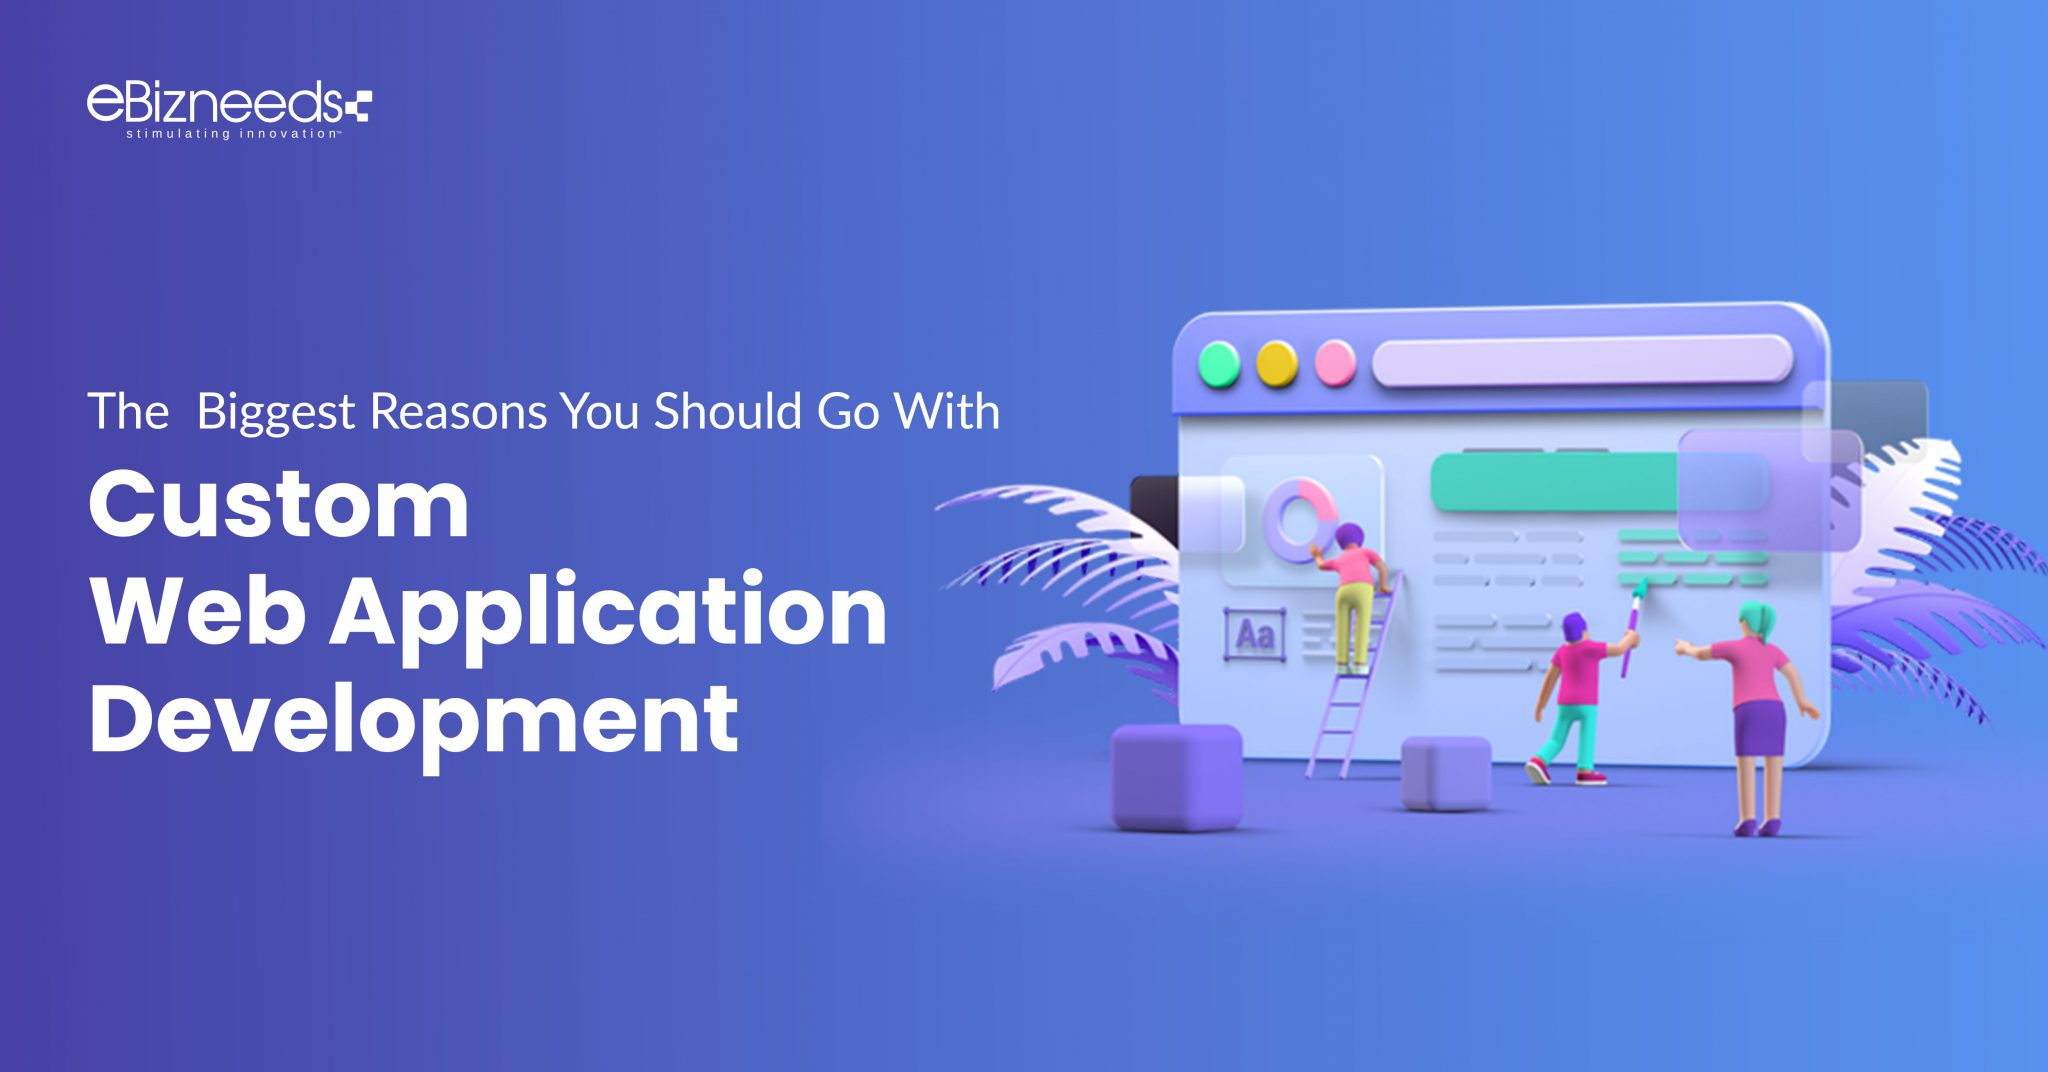 The Biggest Reasons You Should Go With Custom Web Application Development